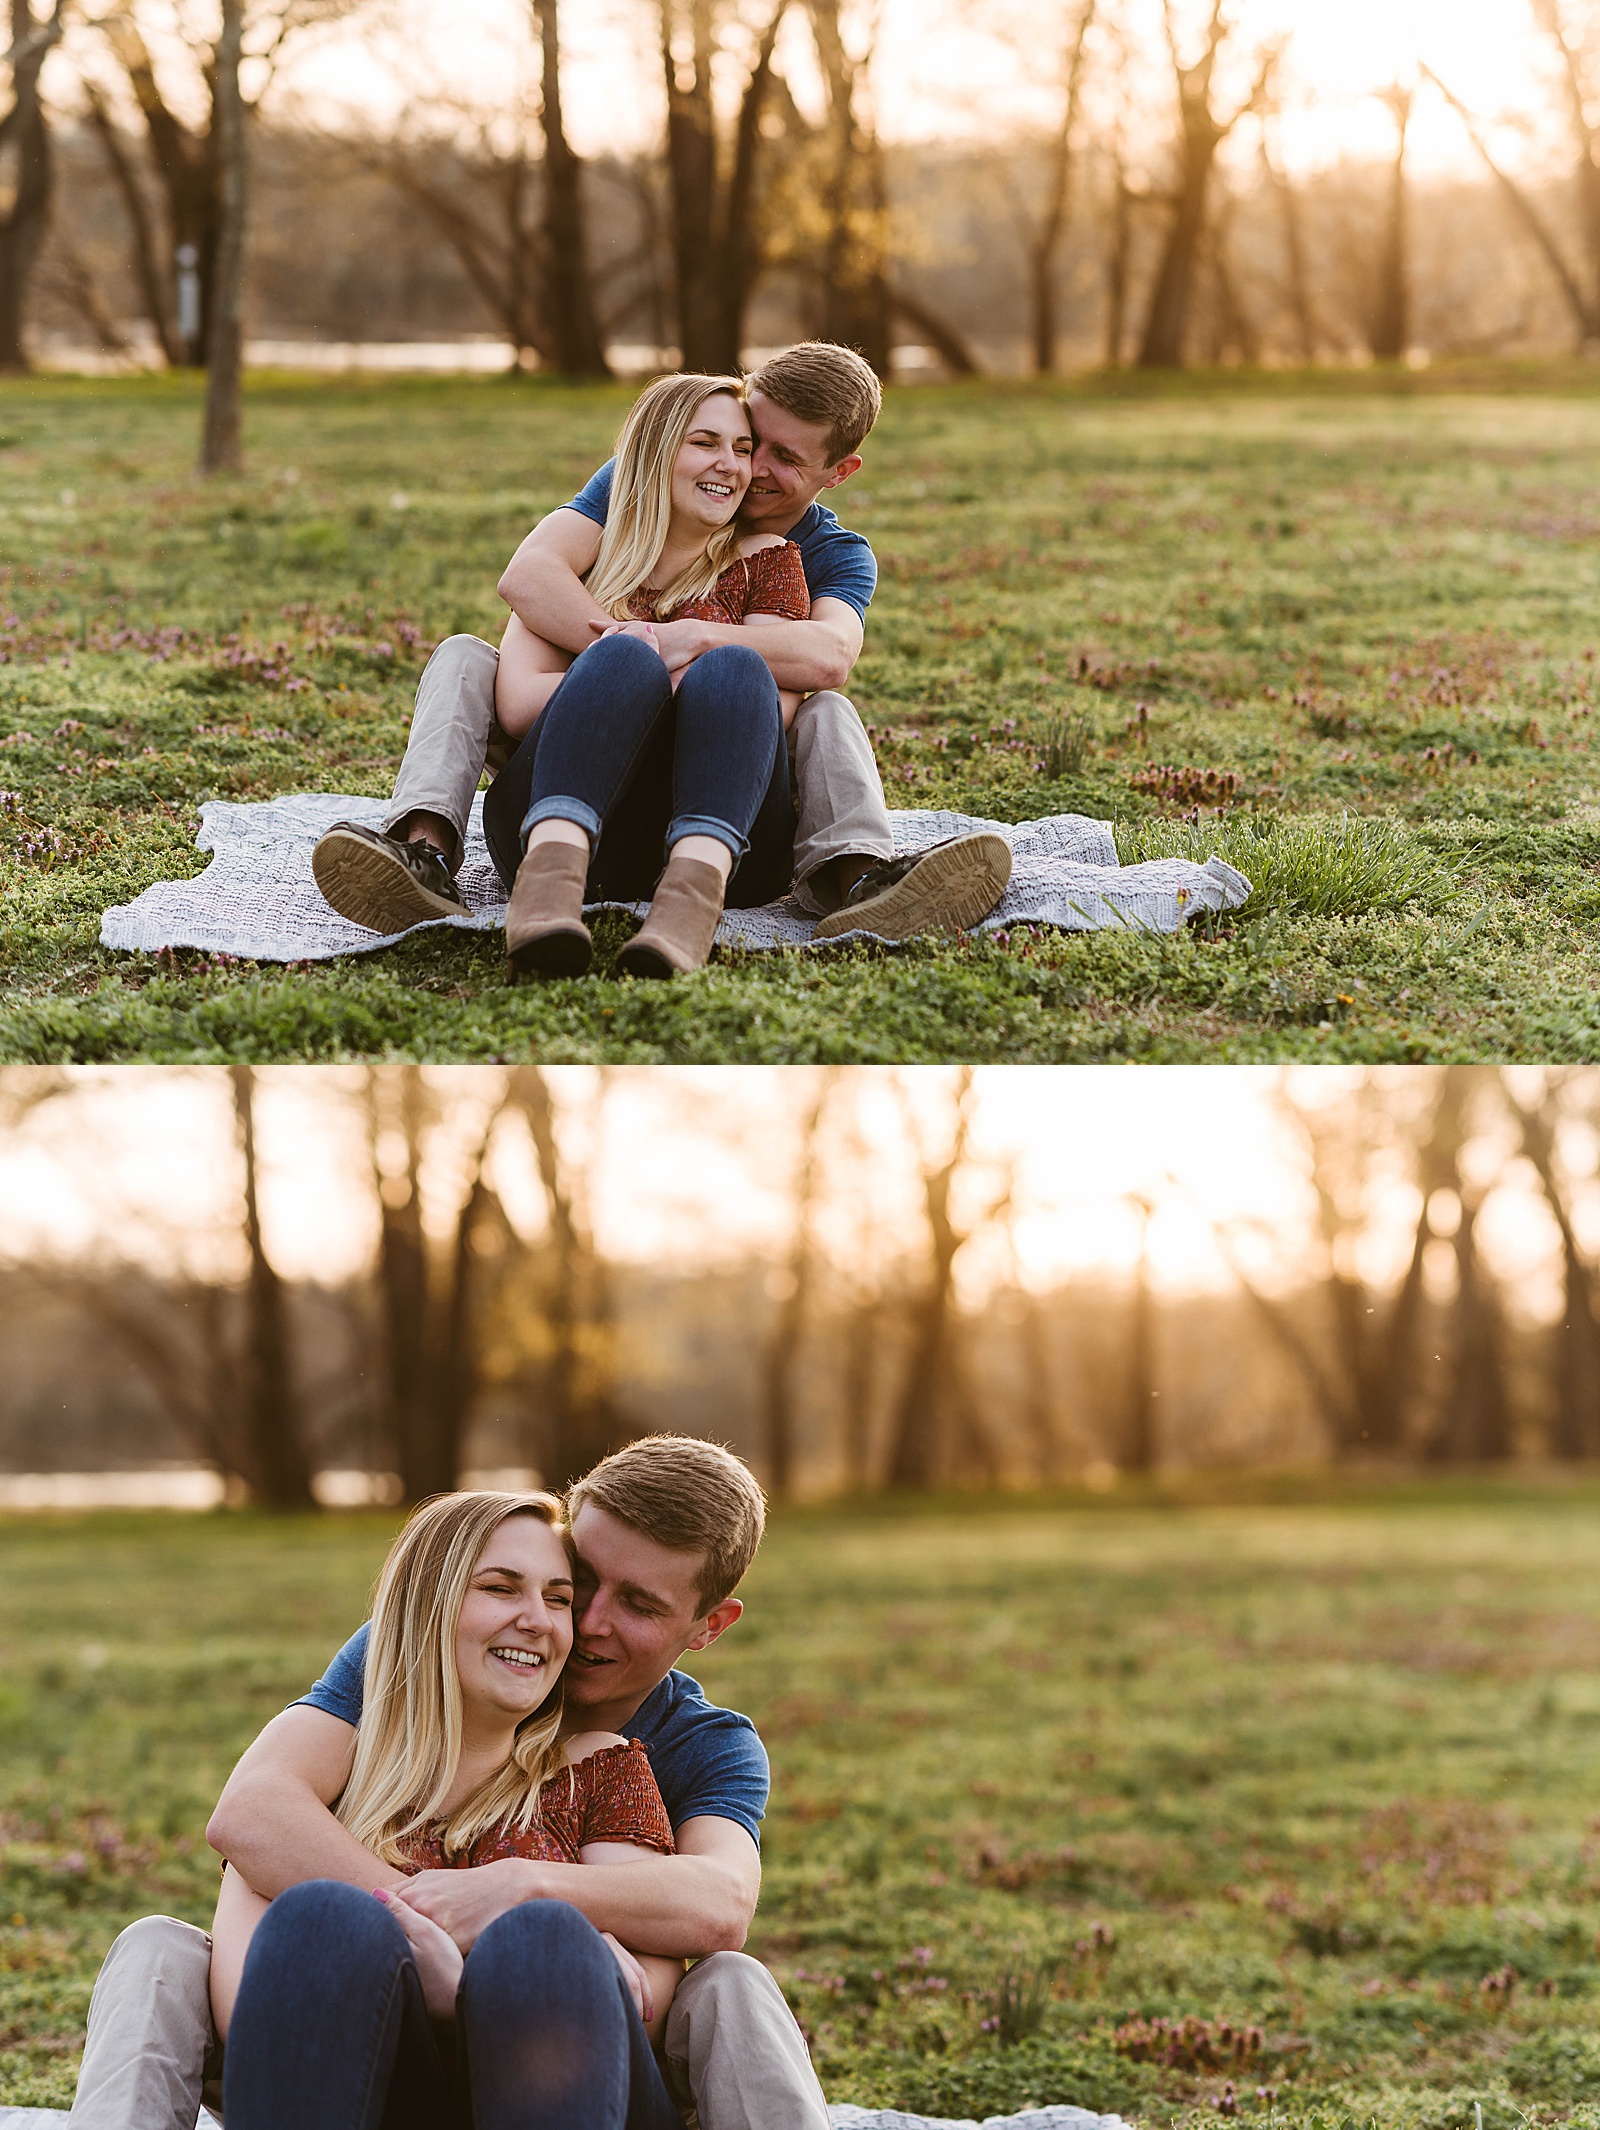 Couple wrapped up and giggling in a park by Richmond Portrait Photographer